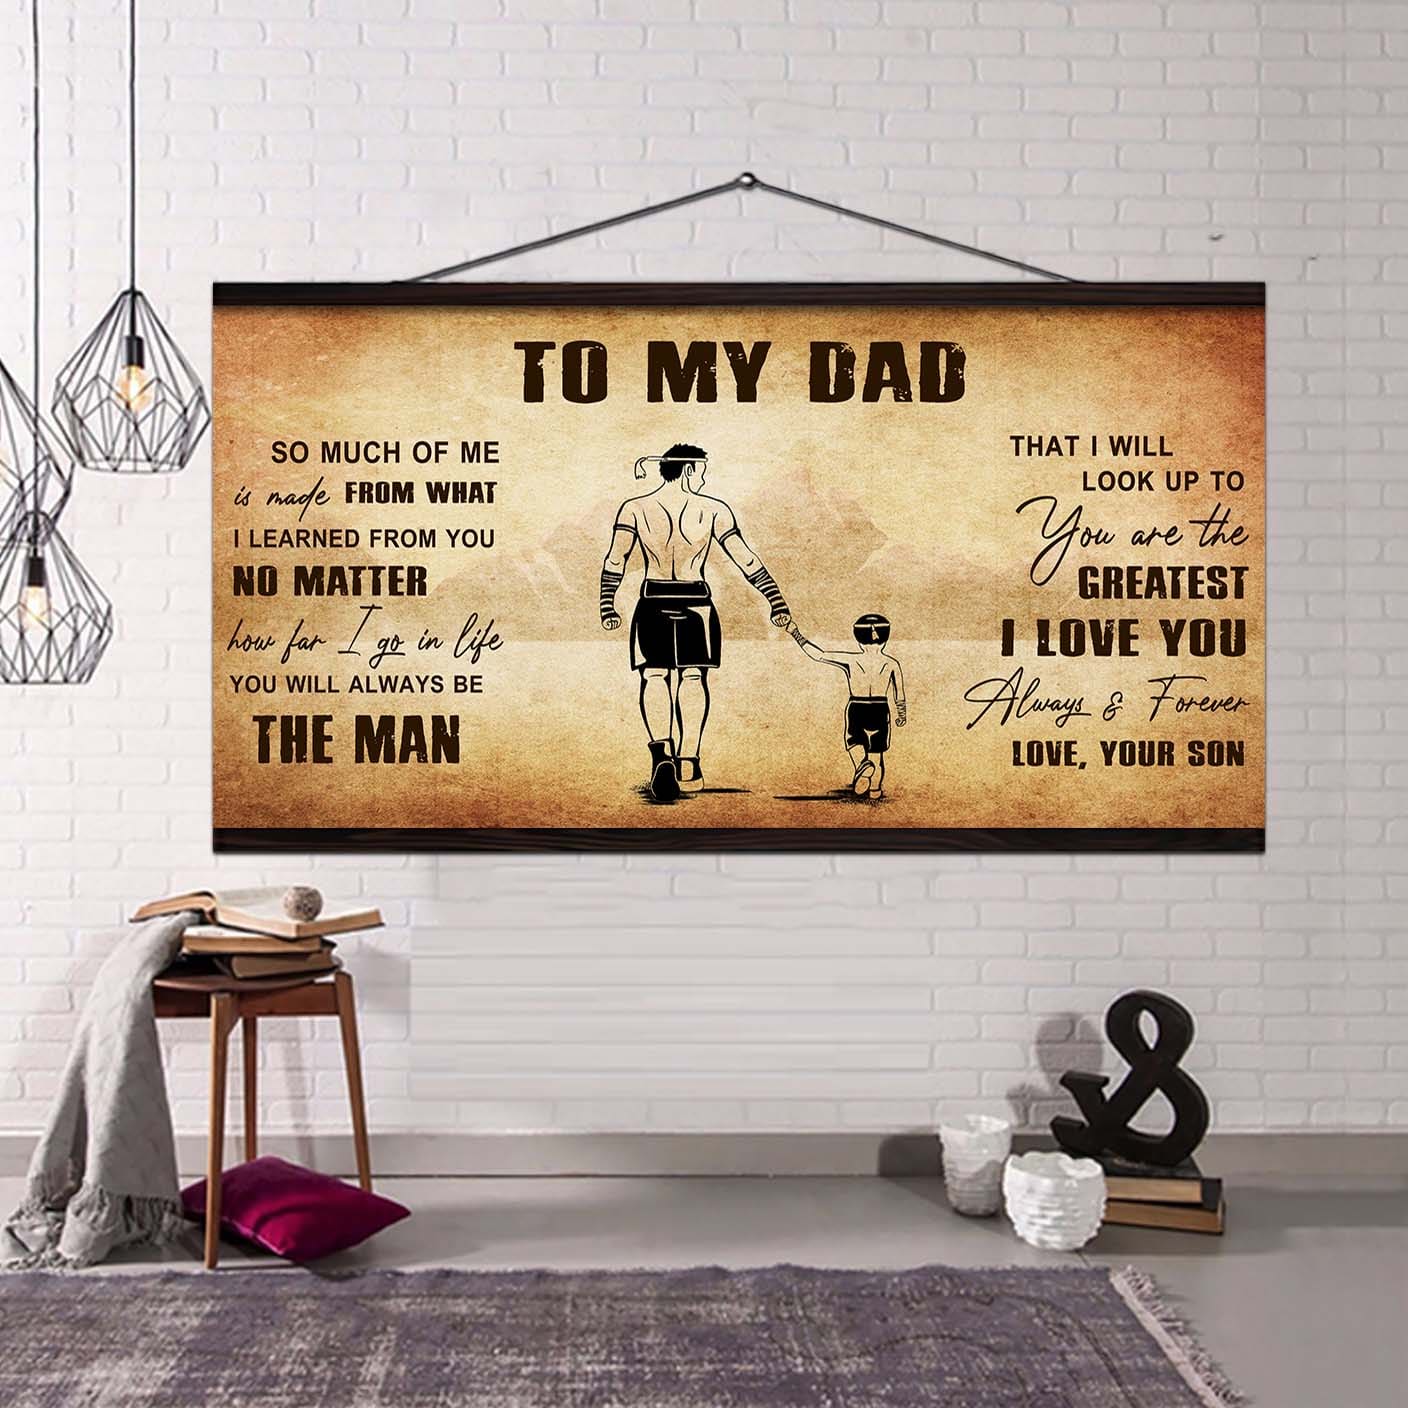 Family To My Dad - You Are The Greatest I Love You Poster Canvas From Son To Father Gifts For Father